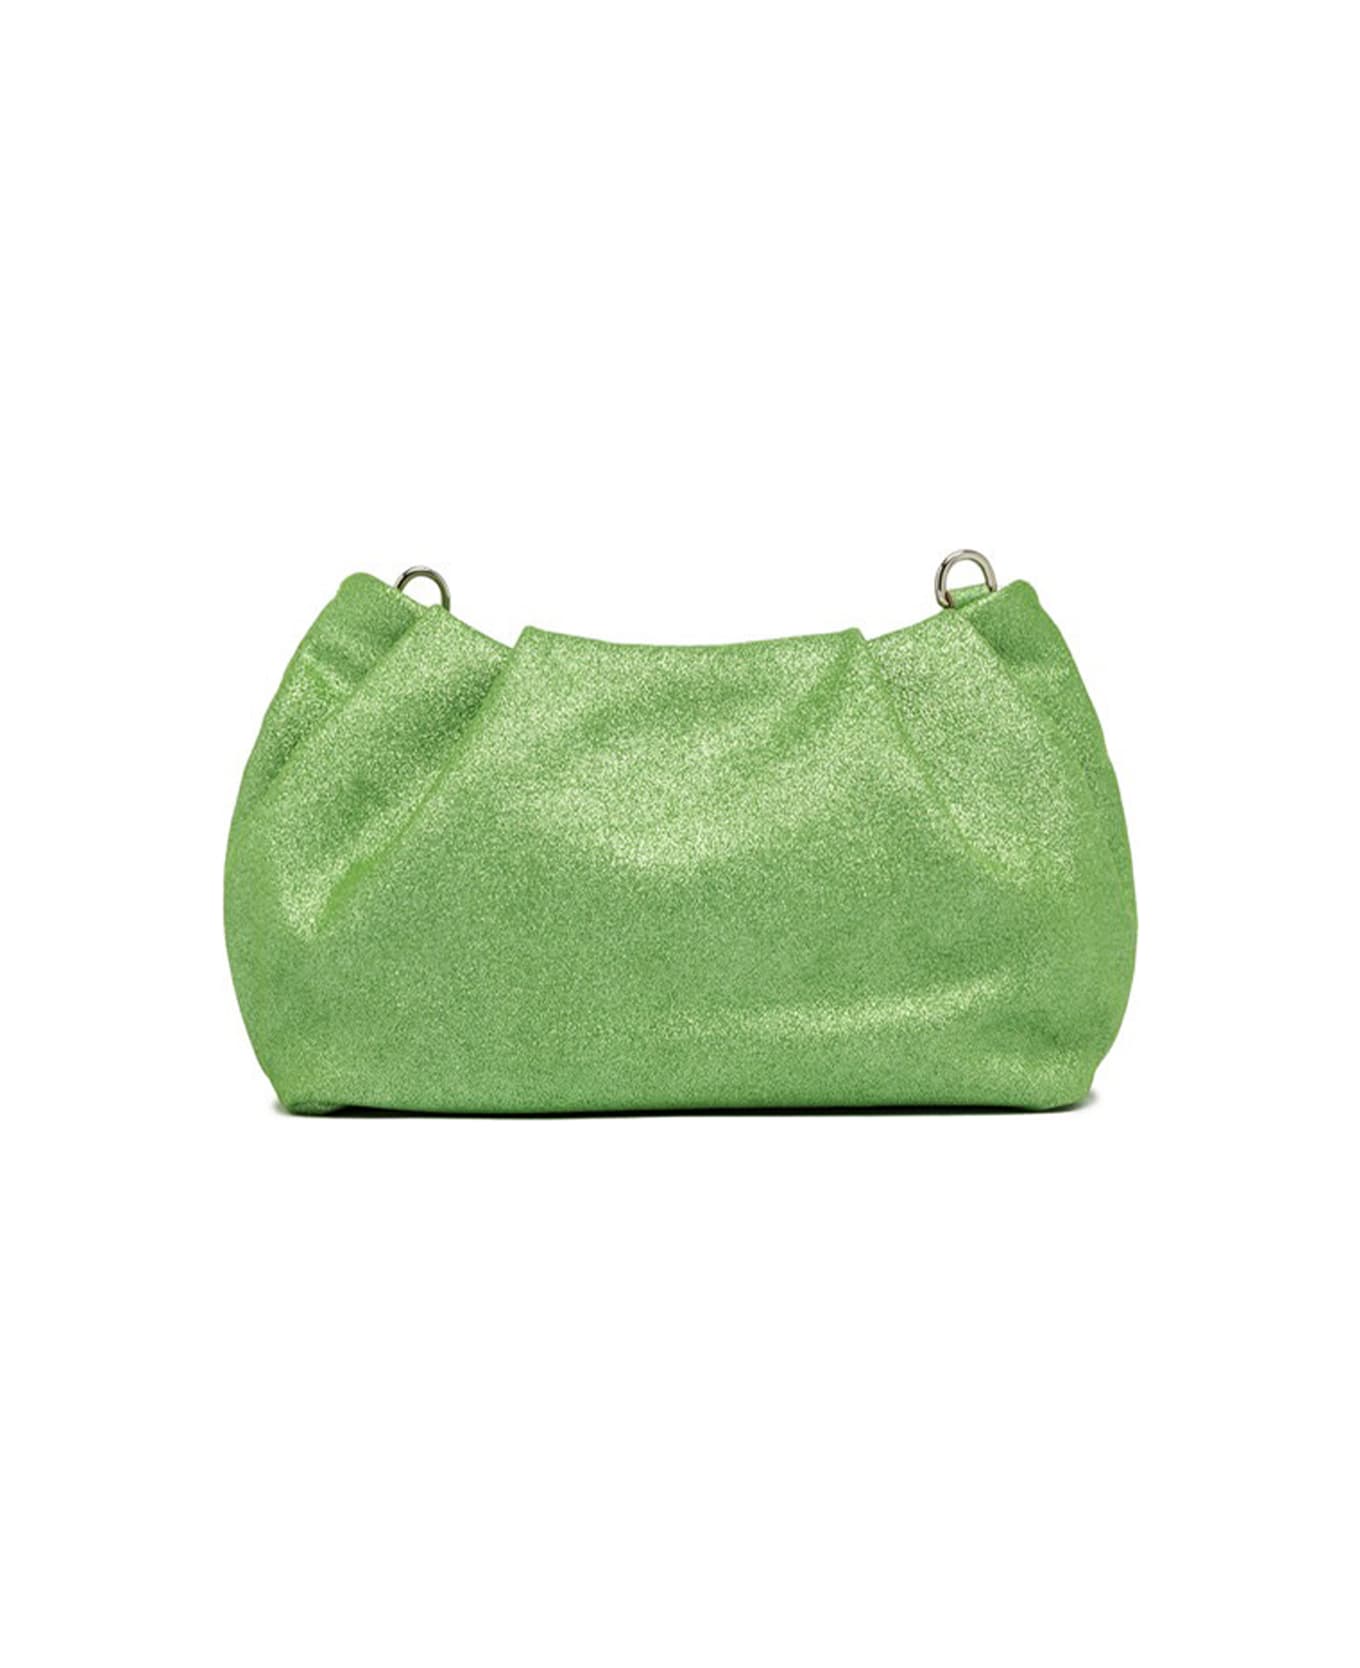 Gianni Chiarini Green Glitter Pearl Clutch Bag With Curled Effect - ACERBO ショルダーバッグ